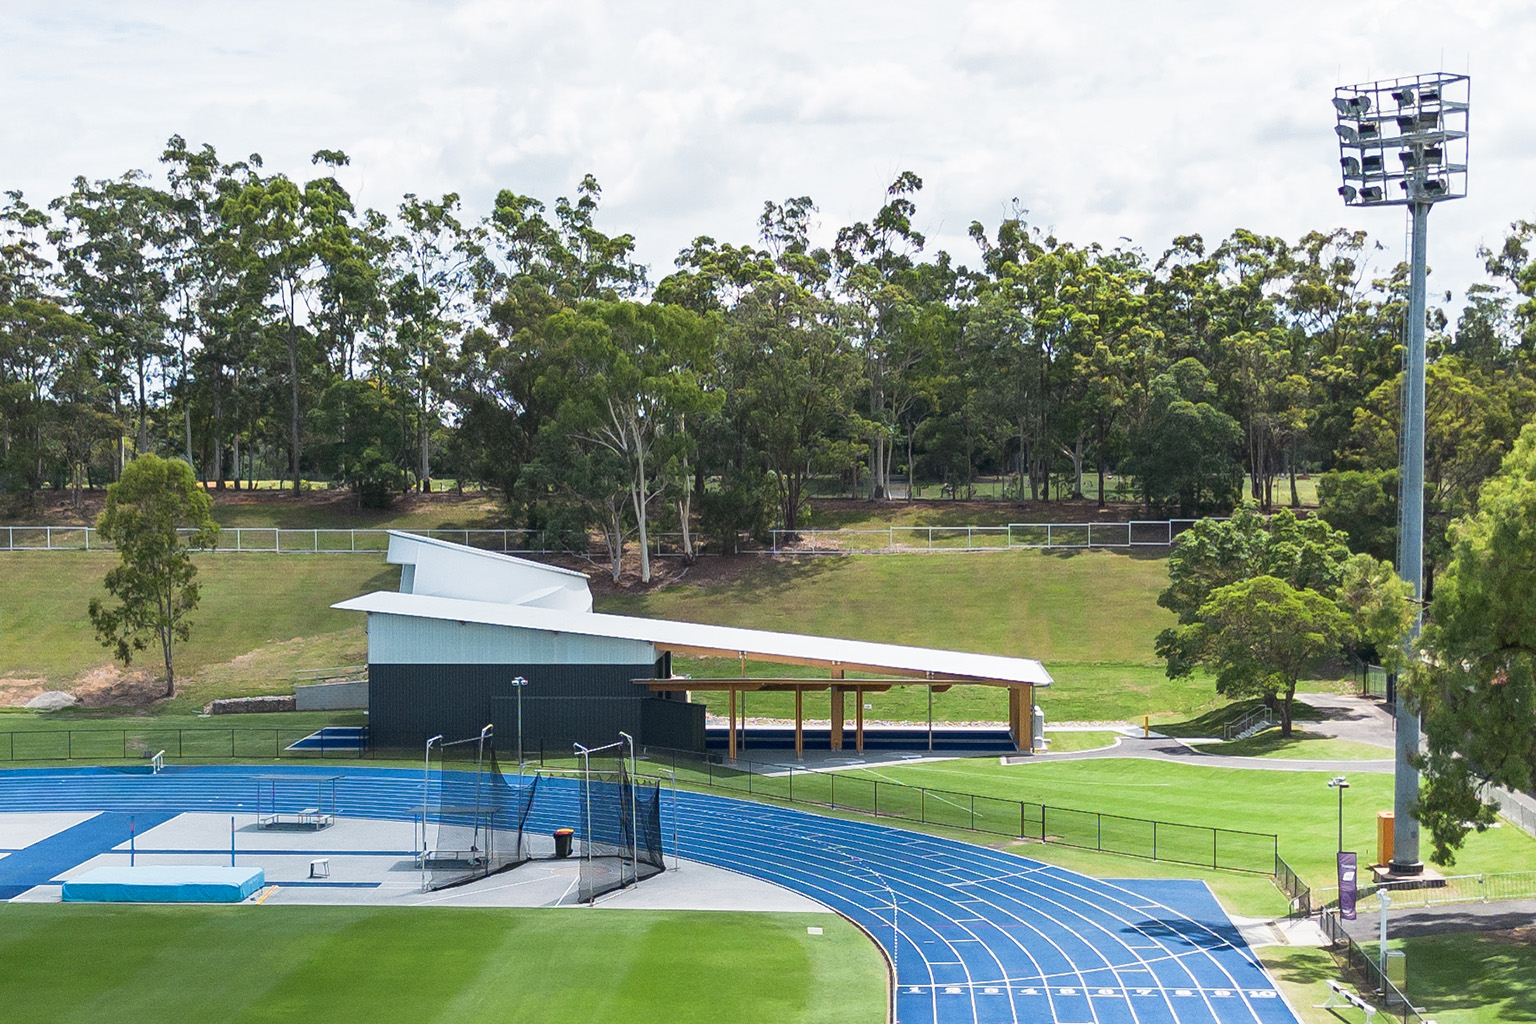 An athletics track and a building housing some of the National Throws Centre of Excellence